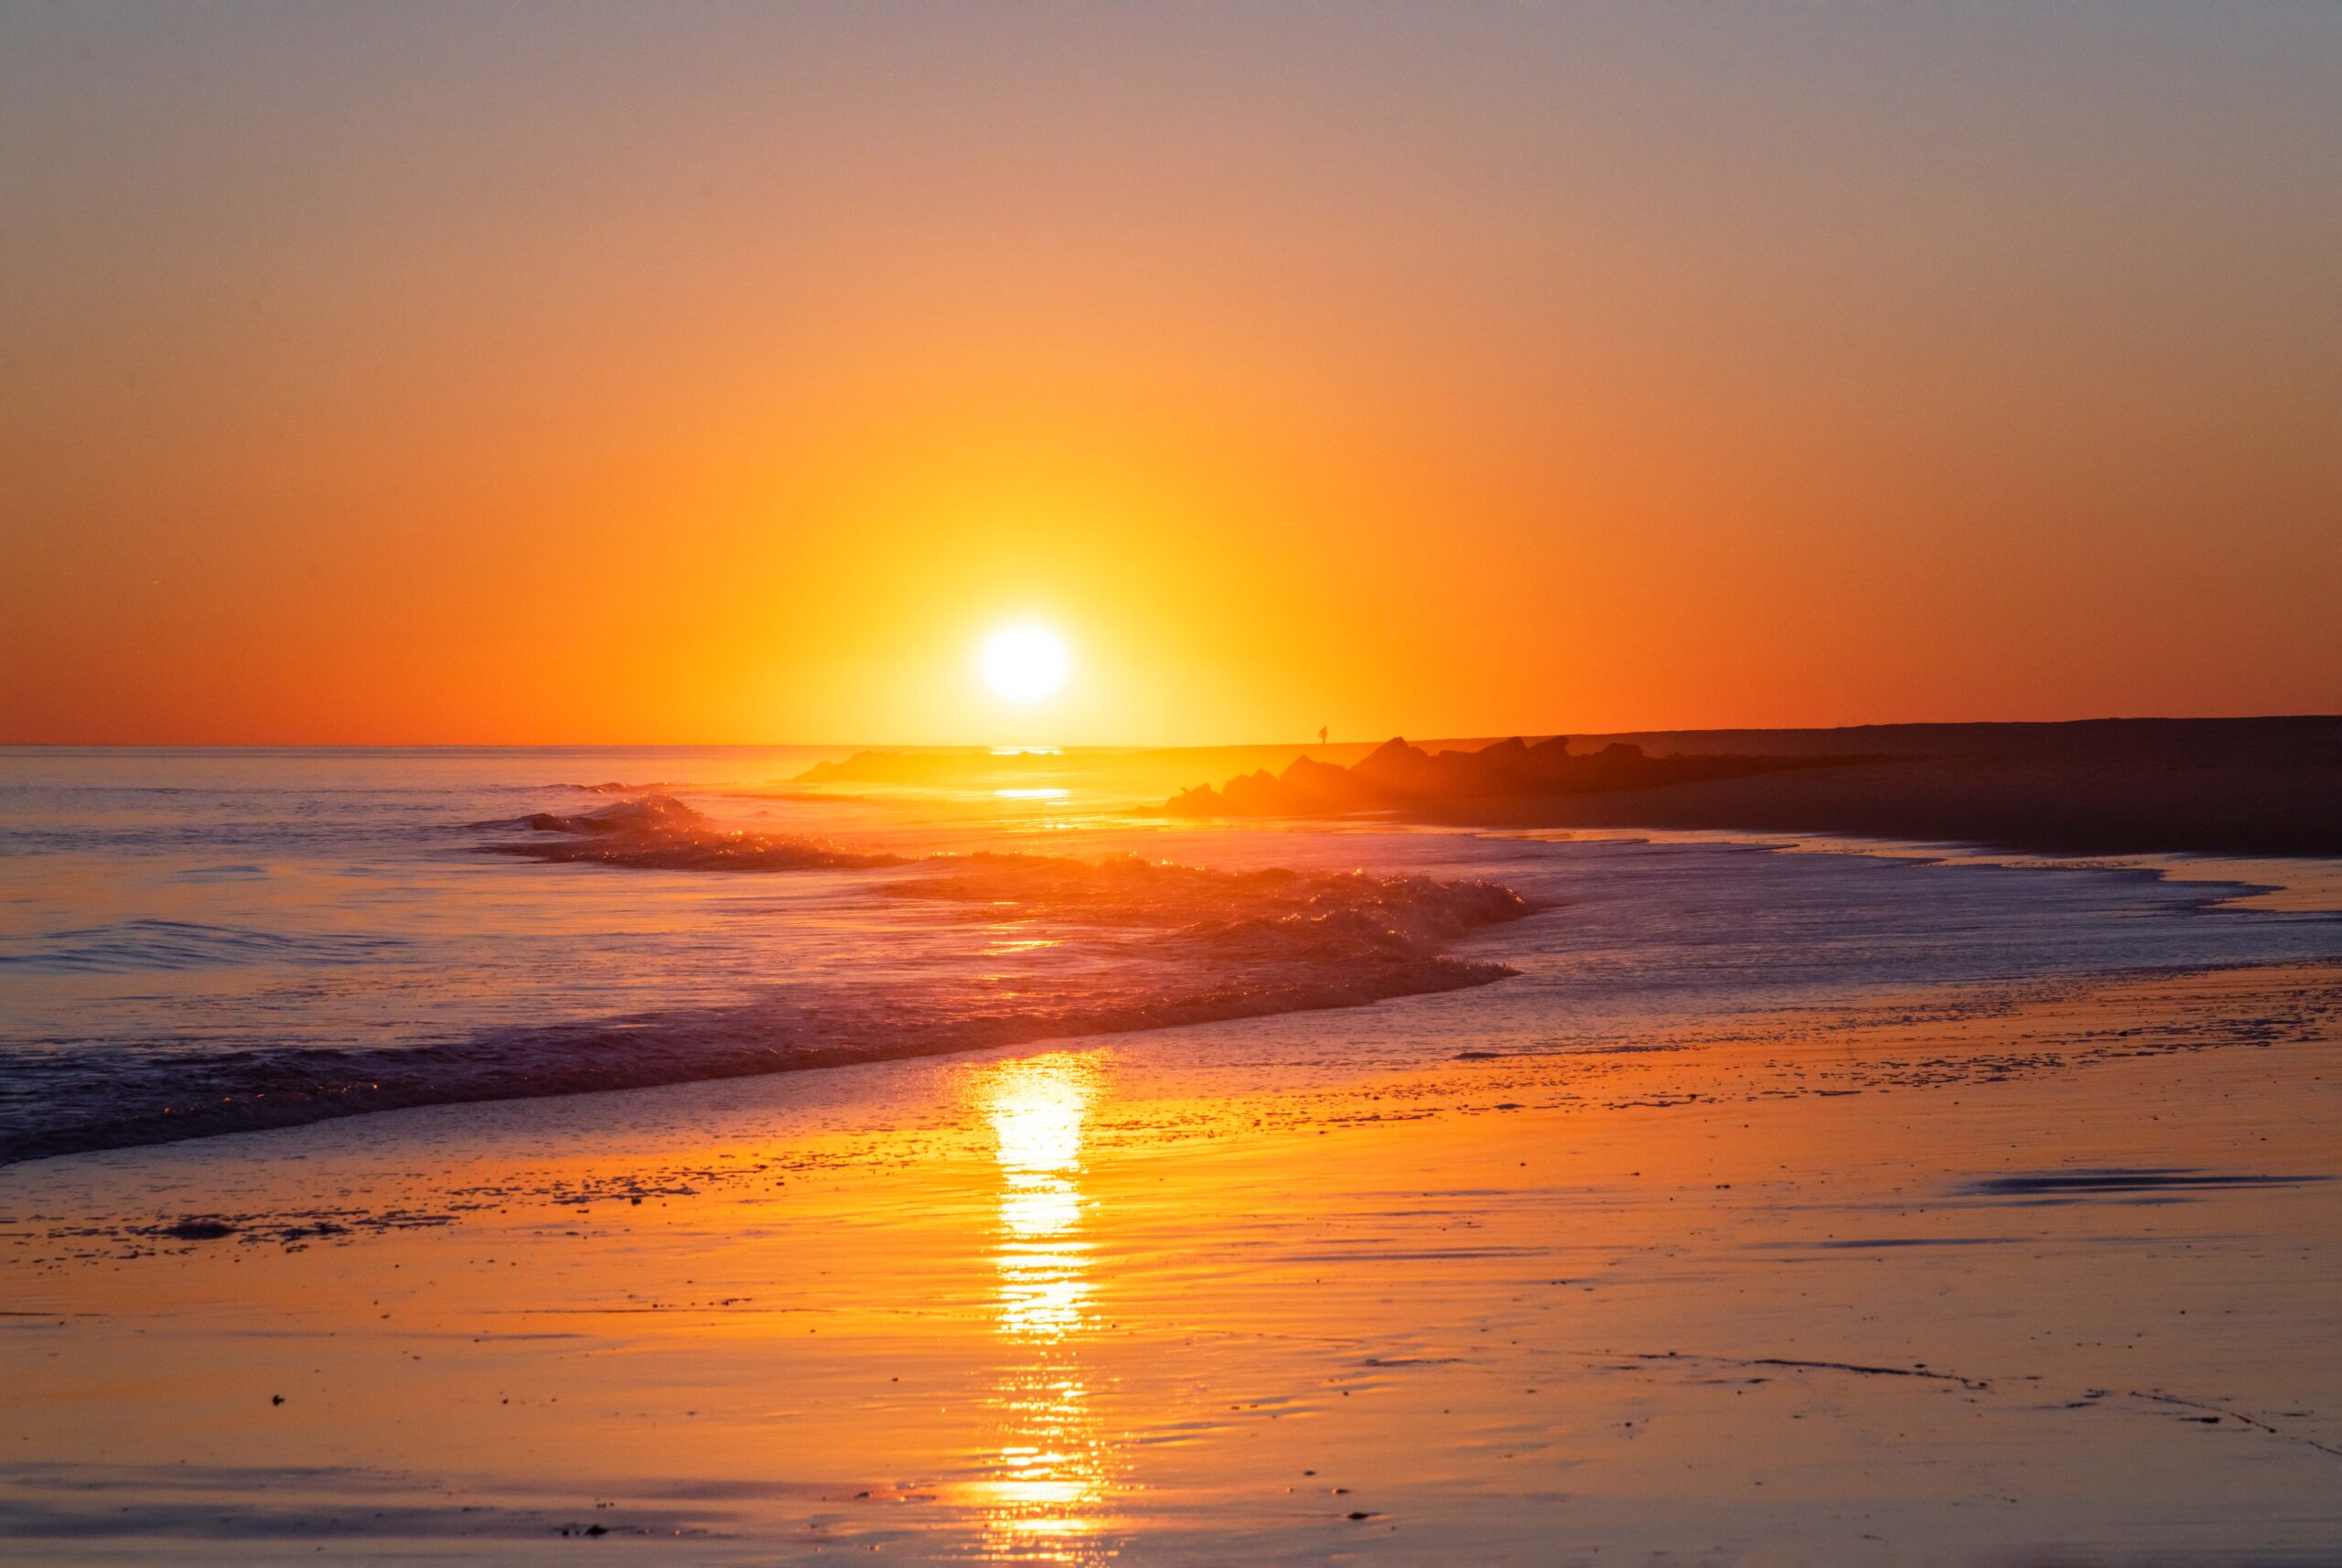 A bright yellow sun setting with a clear sky. The ocean is rolling into the shore and sunlight is reflected on the shoreline